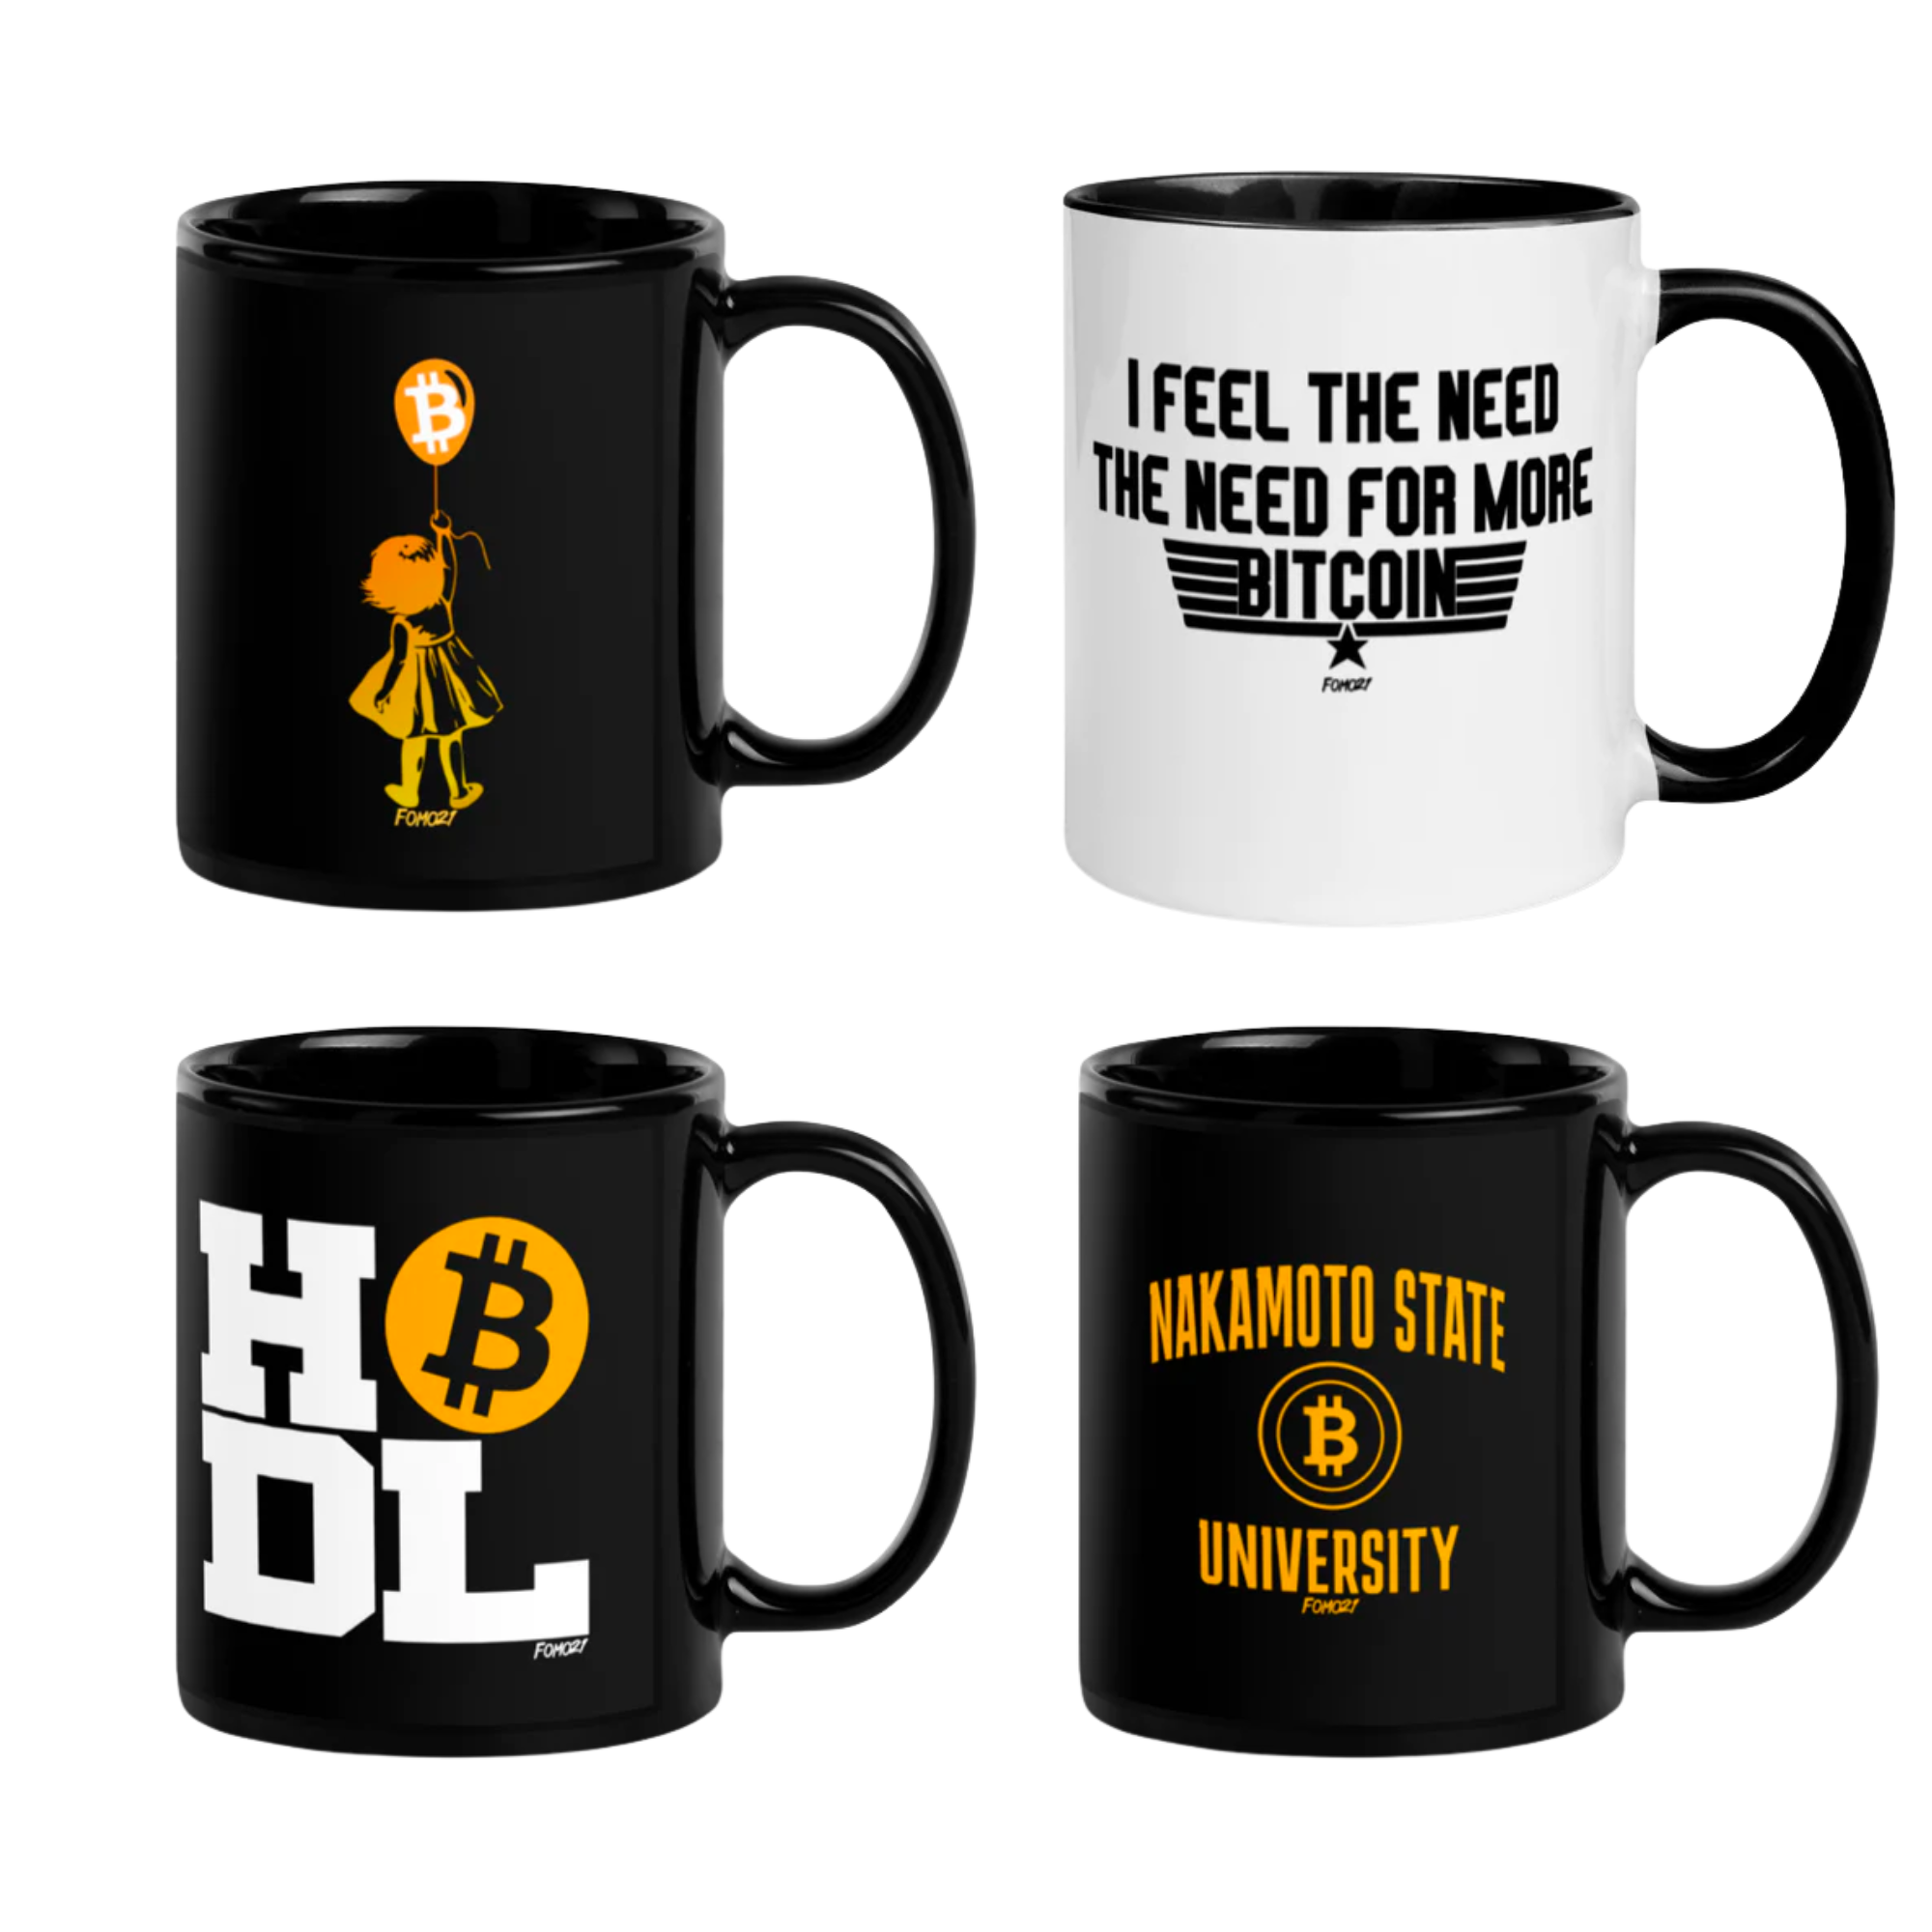 Discover the Top 4 Best-Selling Coffee Mugs at FOMO21.com